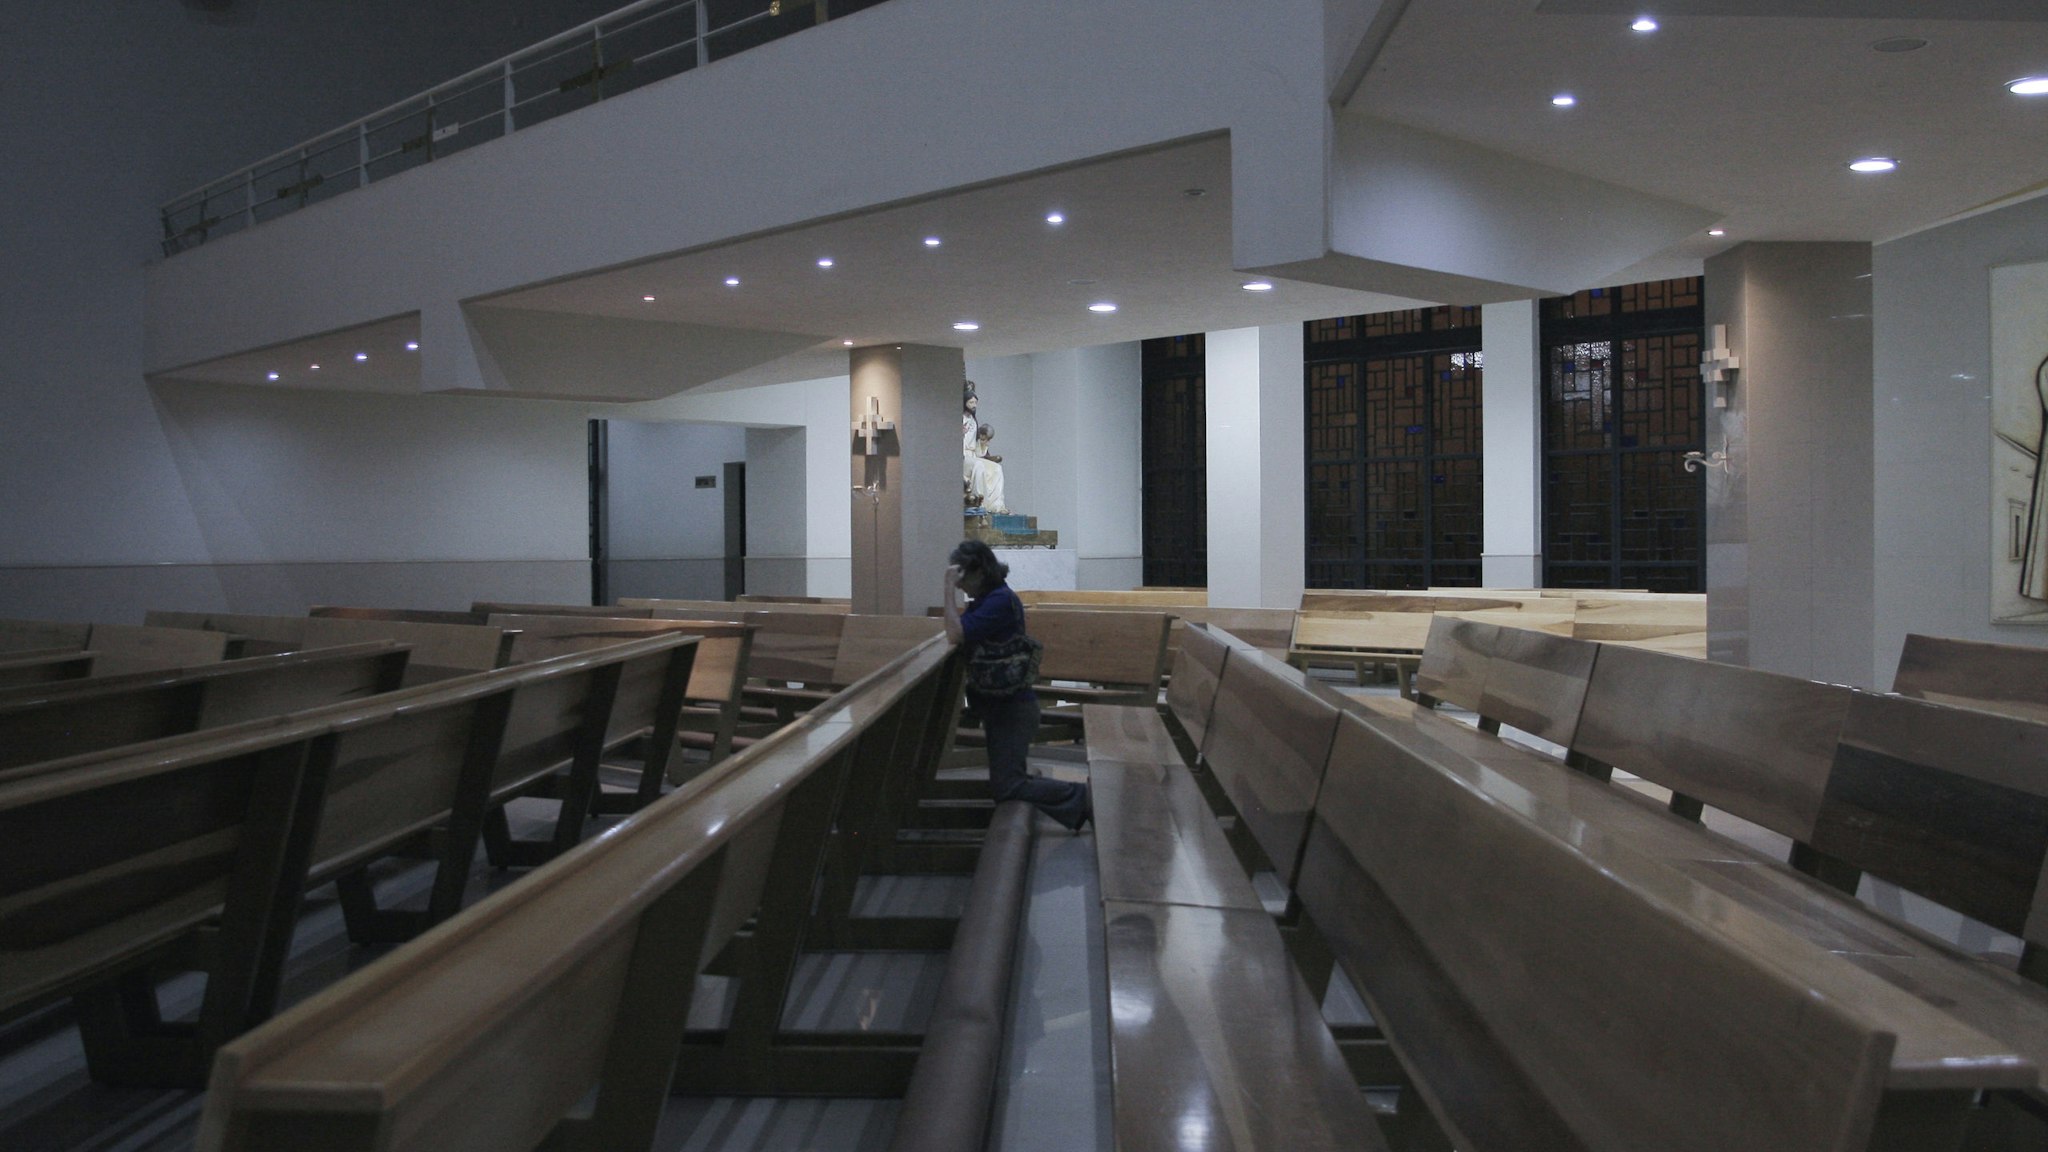 GUADALAJARA, MEXICO - MARCH 27: A woman prays in a empty church on March 27, 2020 in Guadalajara City, Mexico. While most countries and major cities have ordered a lockdown to halt COVID-19 spread, Mexican president Lopez Obrador has not called for national quarantine yet. His critics argue he downplays on coronavirus threat as he seek to protect the economy. In Guadalajara, measures to avoid the spread of the COVID-19 have been taken, schools of all levels are closed since March 16, business around the city must shut down and many tests will be taken in people suspected to be infected. 81 cases have been confirmed in Mexican State of Jalisco. (Photo by Leonardo Alvarez Hernandez/Getty Images)